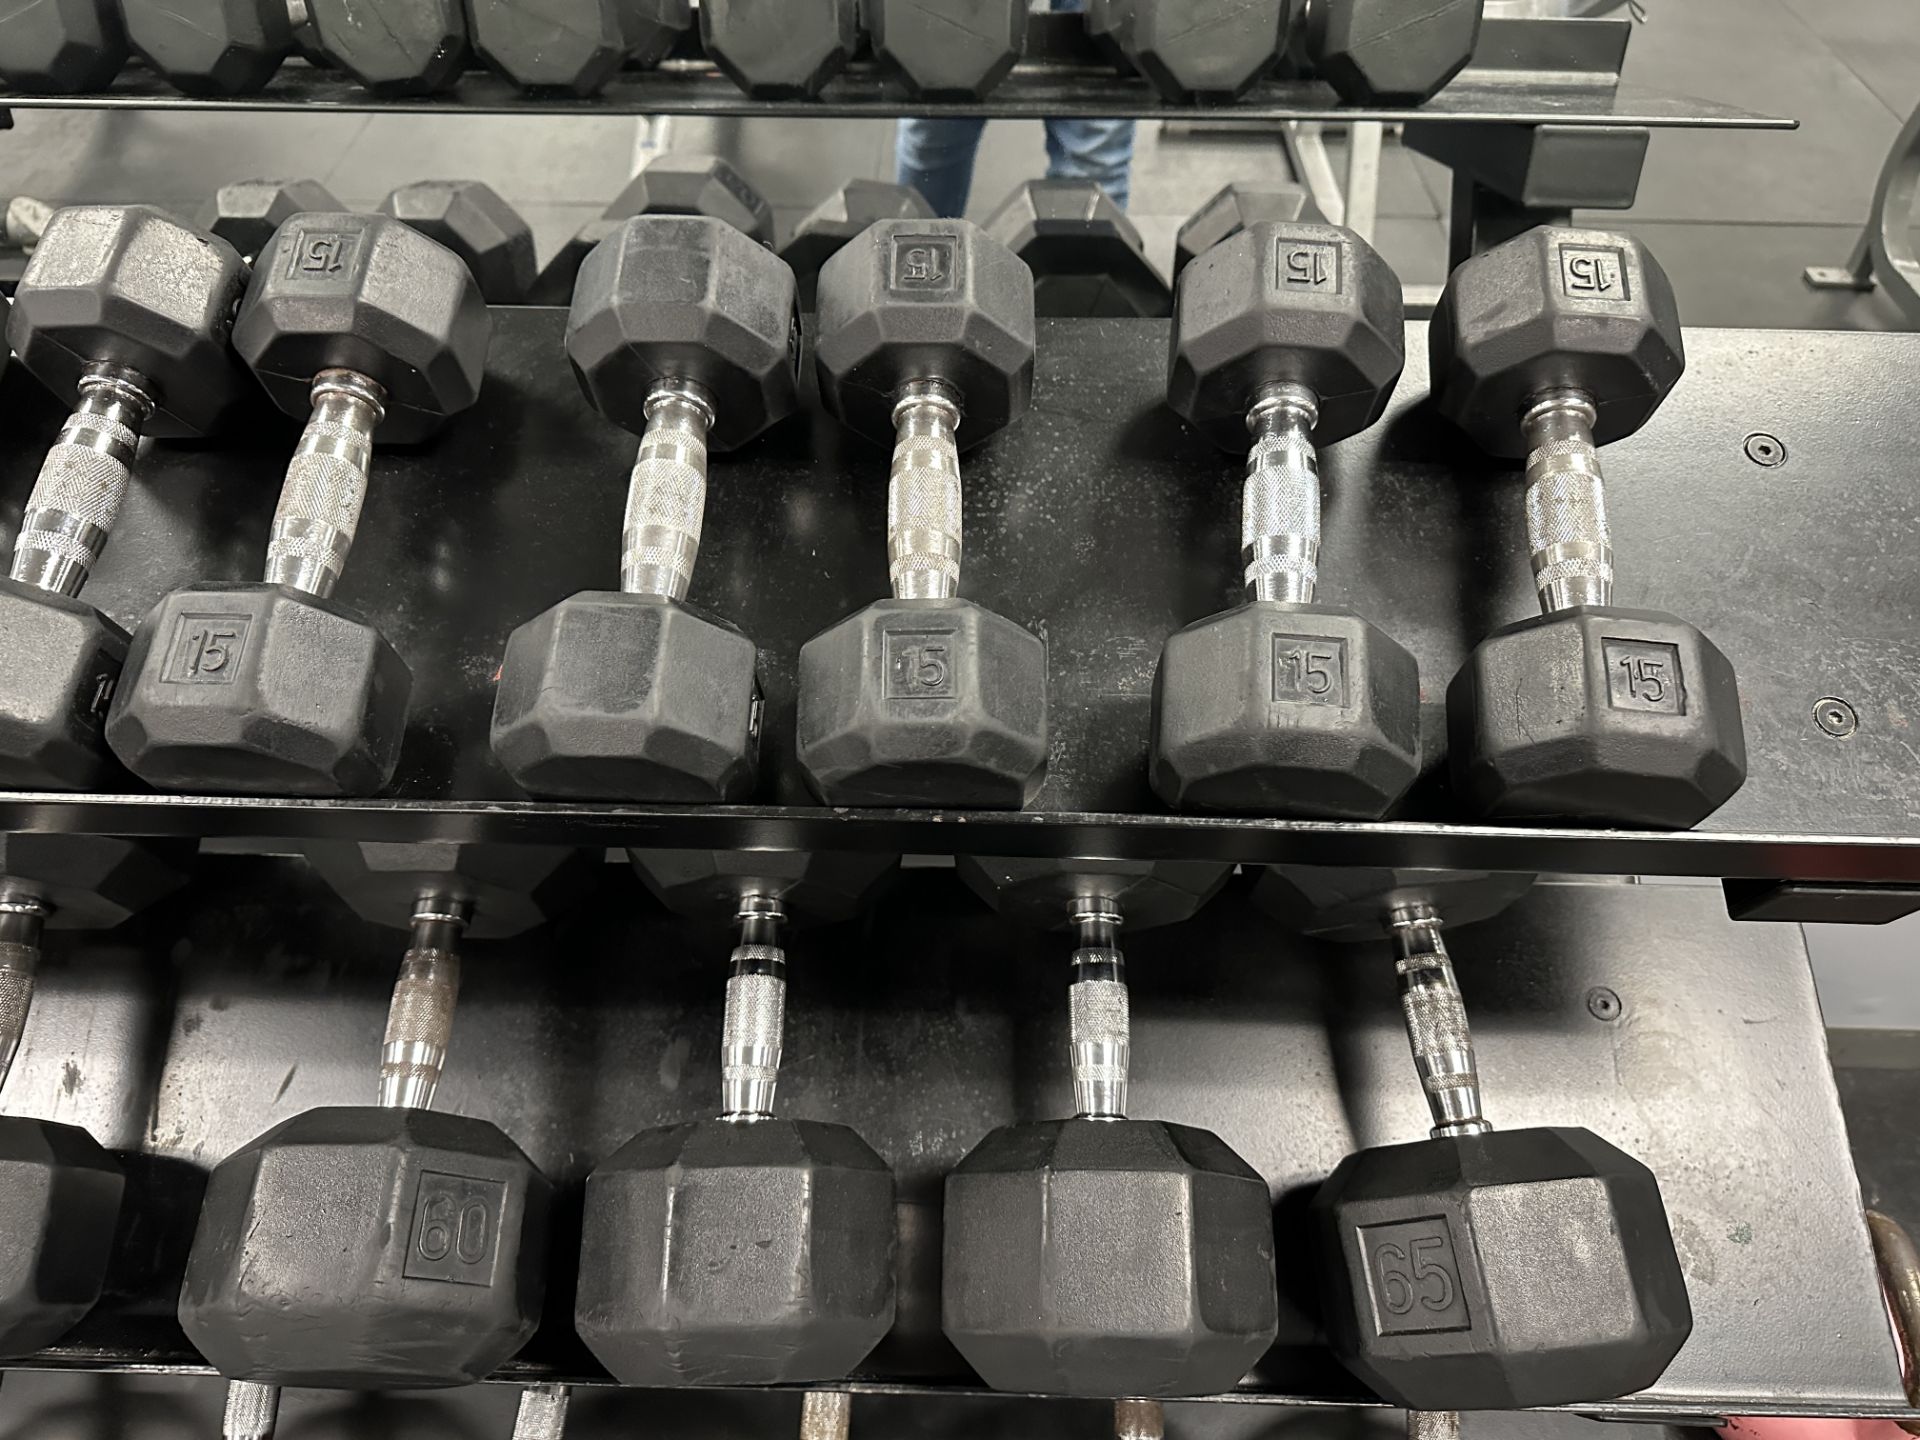 Full Set of Dumbbells Between 5 Lbs. - 100Lbs in 5 Lb. Increments (Excluding 50 Lb. And Adding Pairs - Image 4 of 4